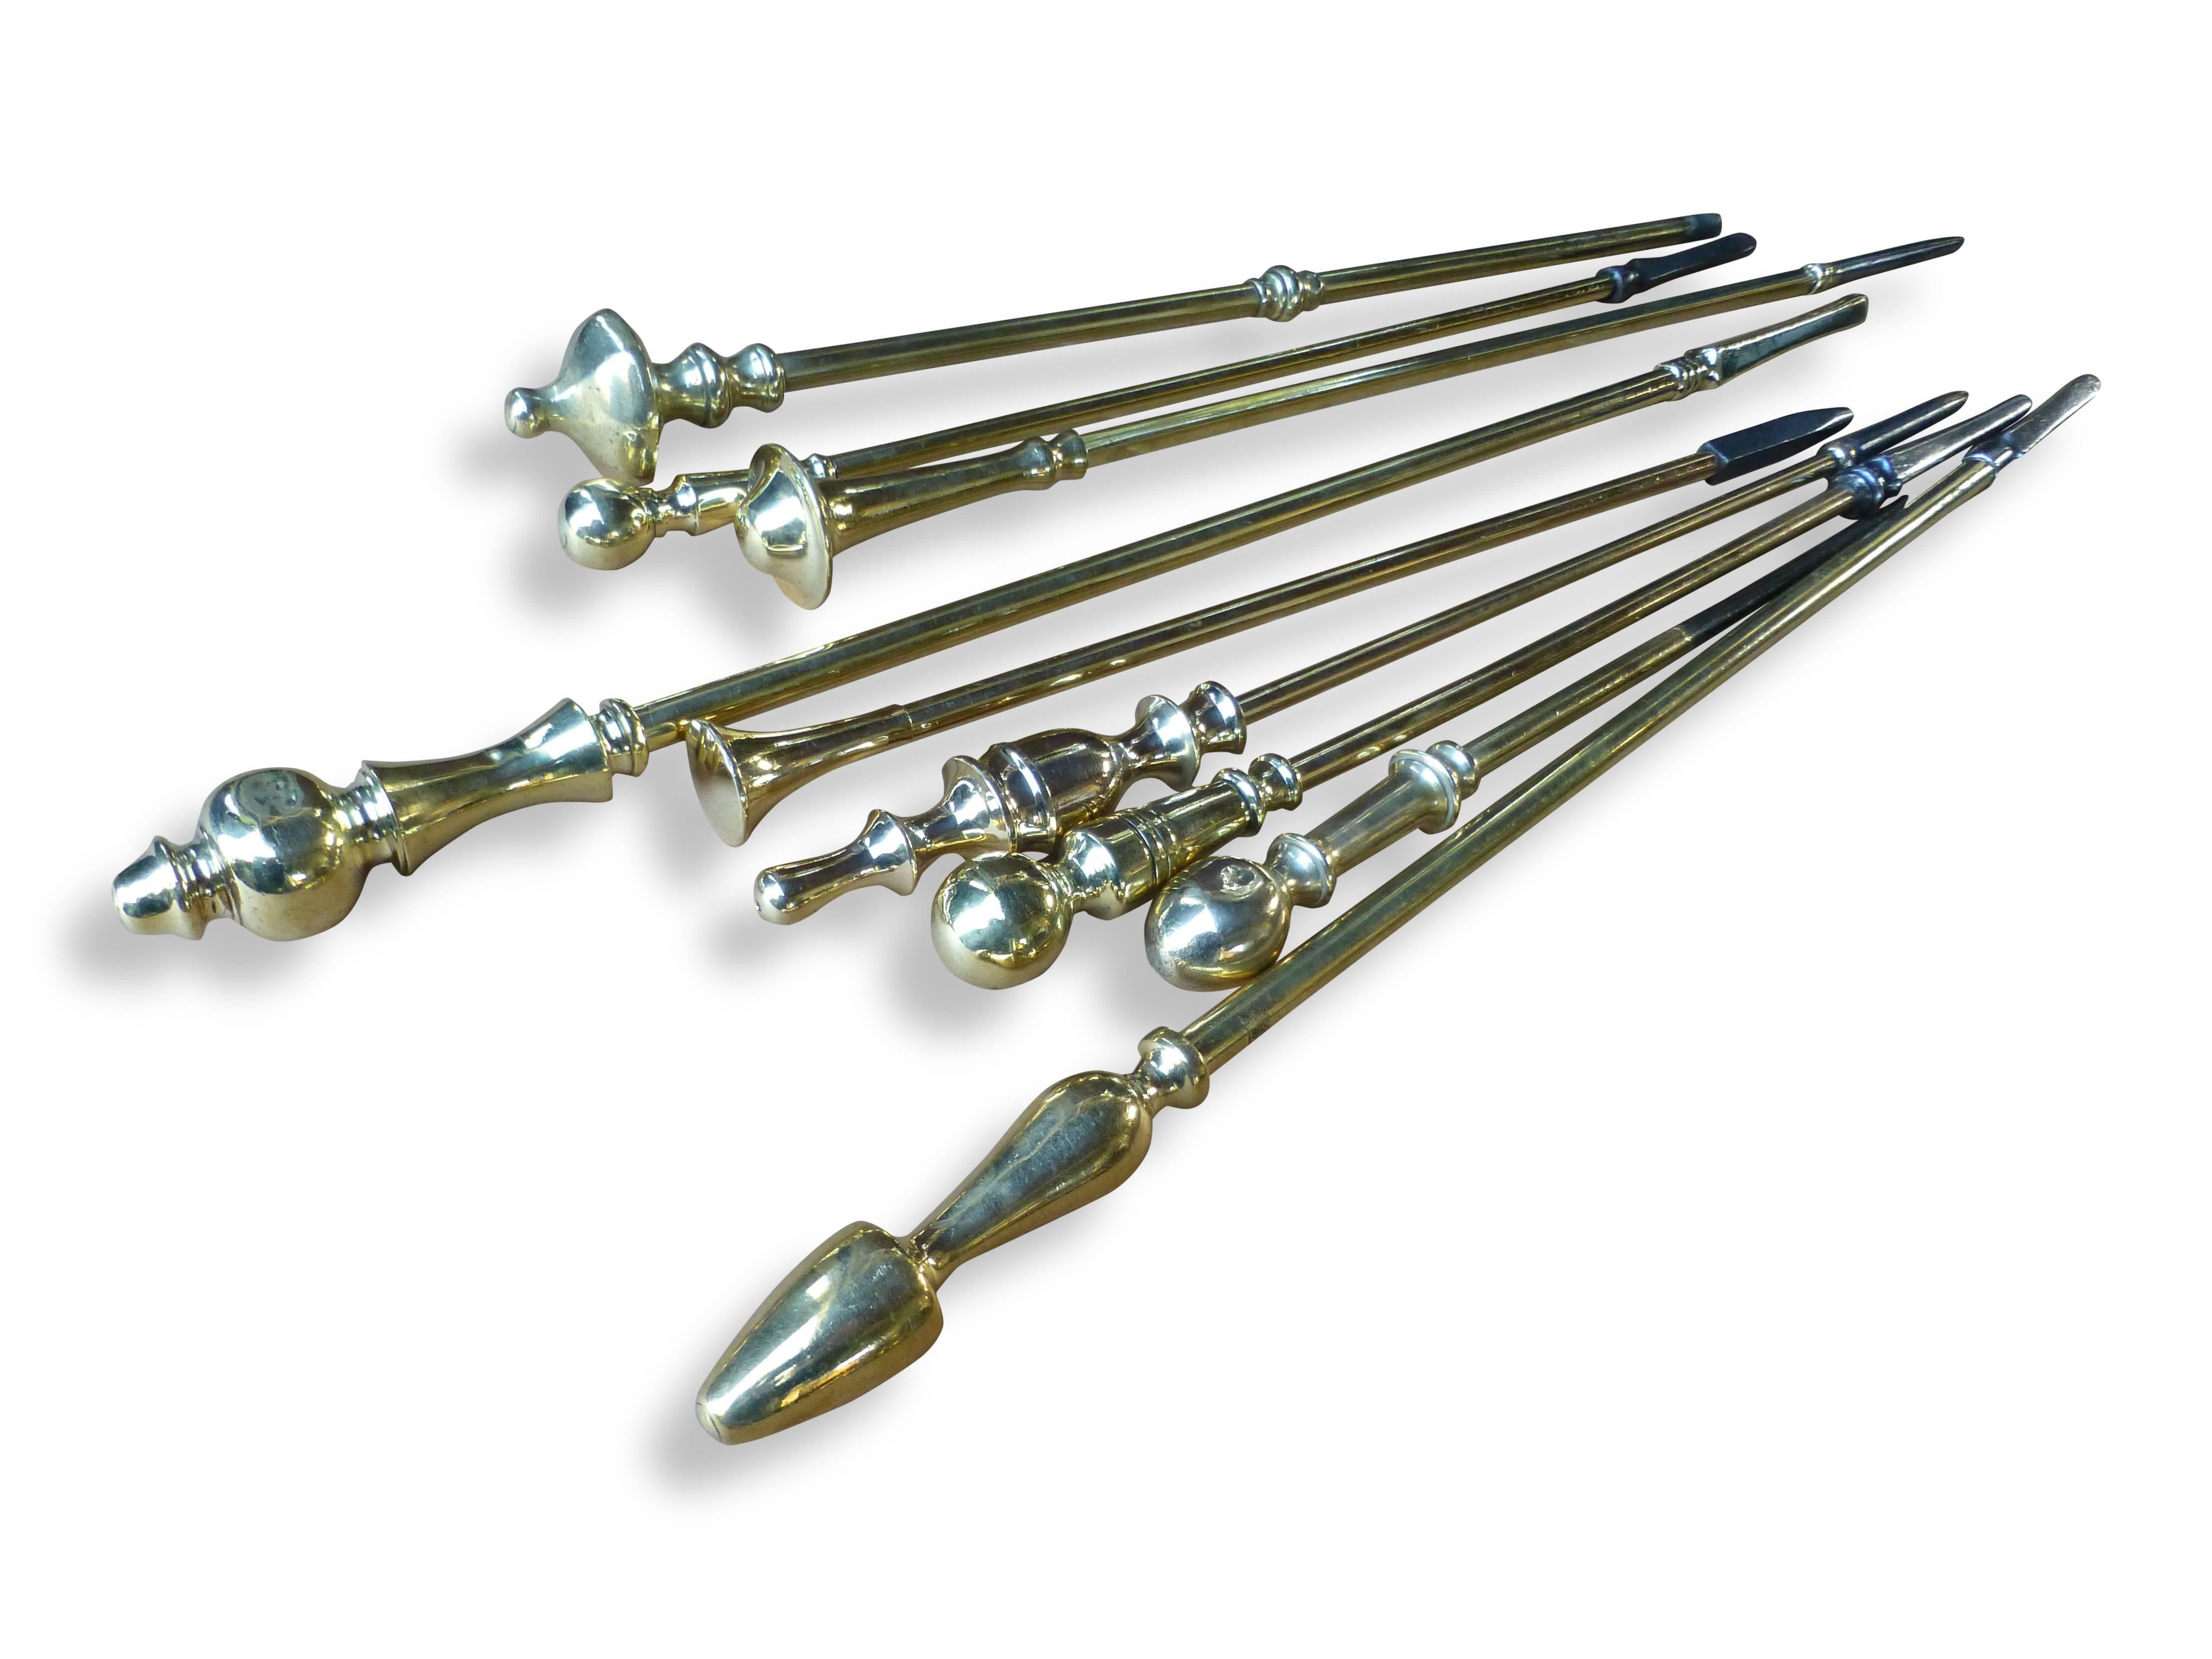 British Antique Fireplace Pokers, Fire Pokers